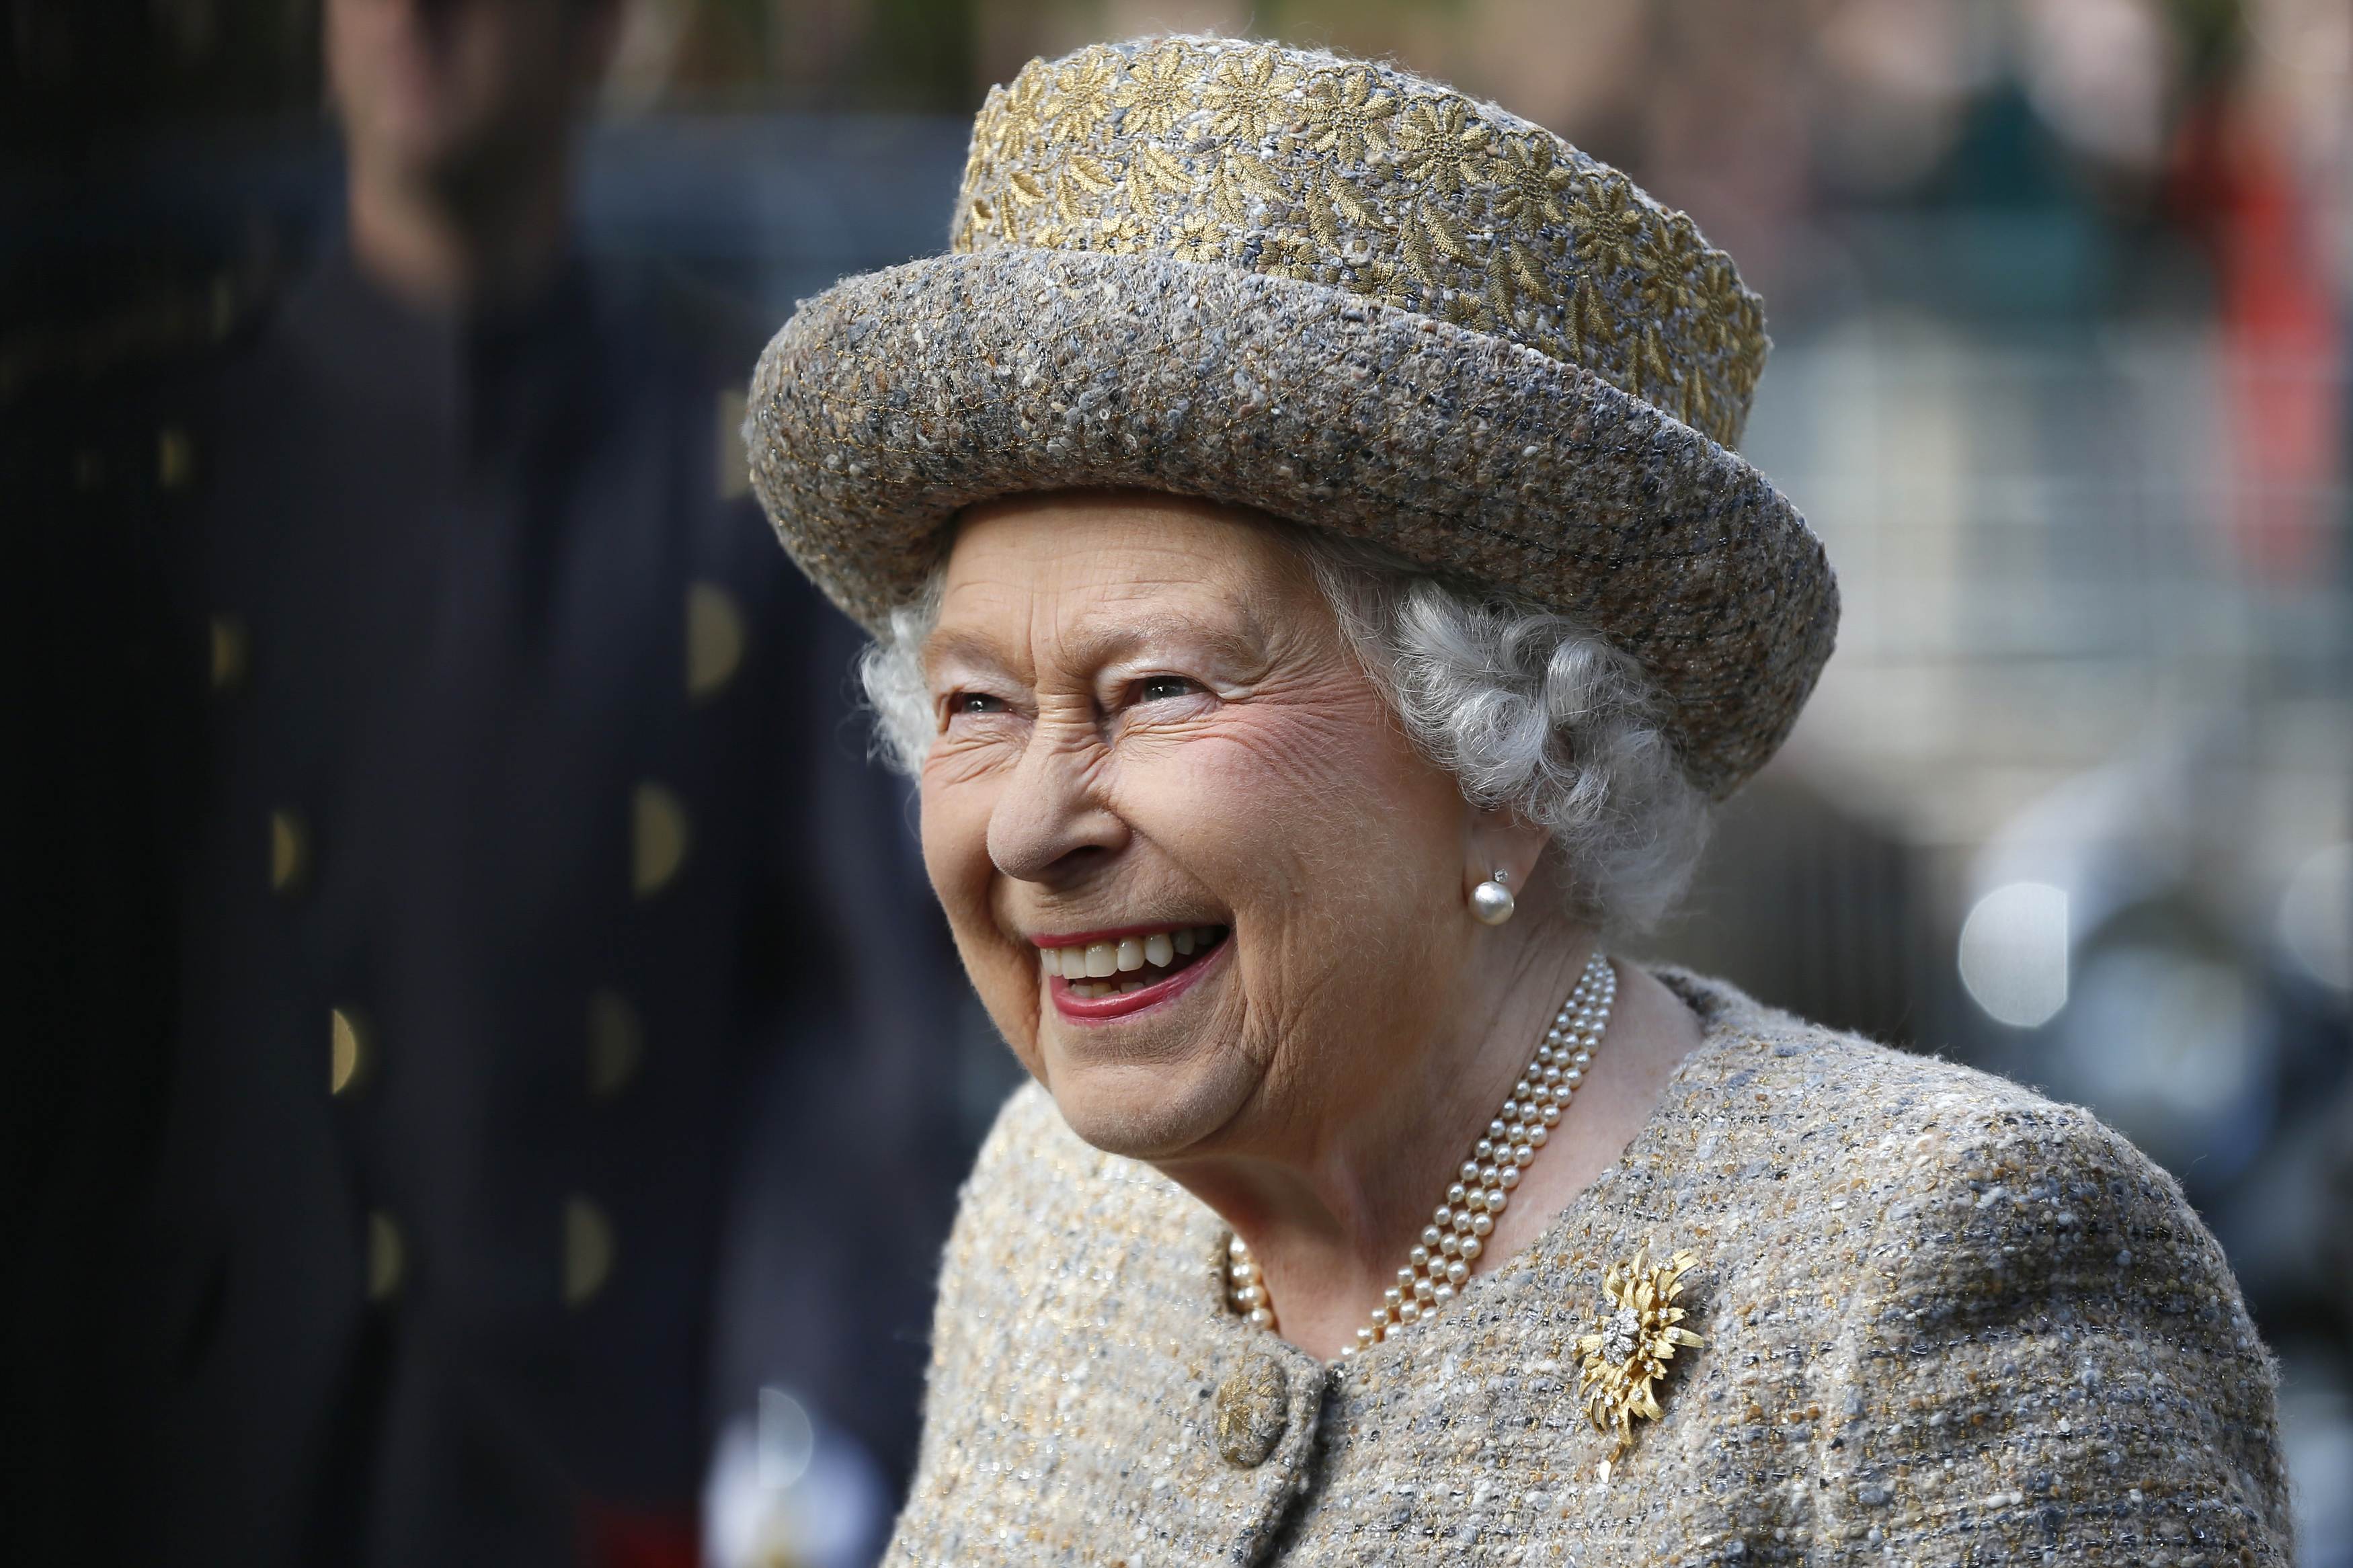  Queen Elizabeth II smiles as she arrives before the Opening of the Flanders' Fields Memorial Garden at Wellington Barracks on November 6, 2014 in London, England | Source: Getty Images 